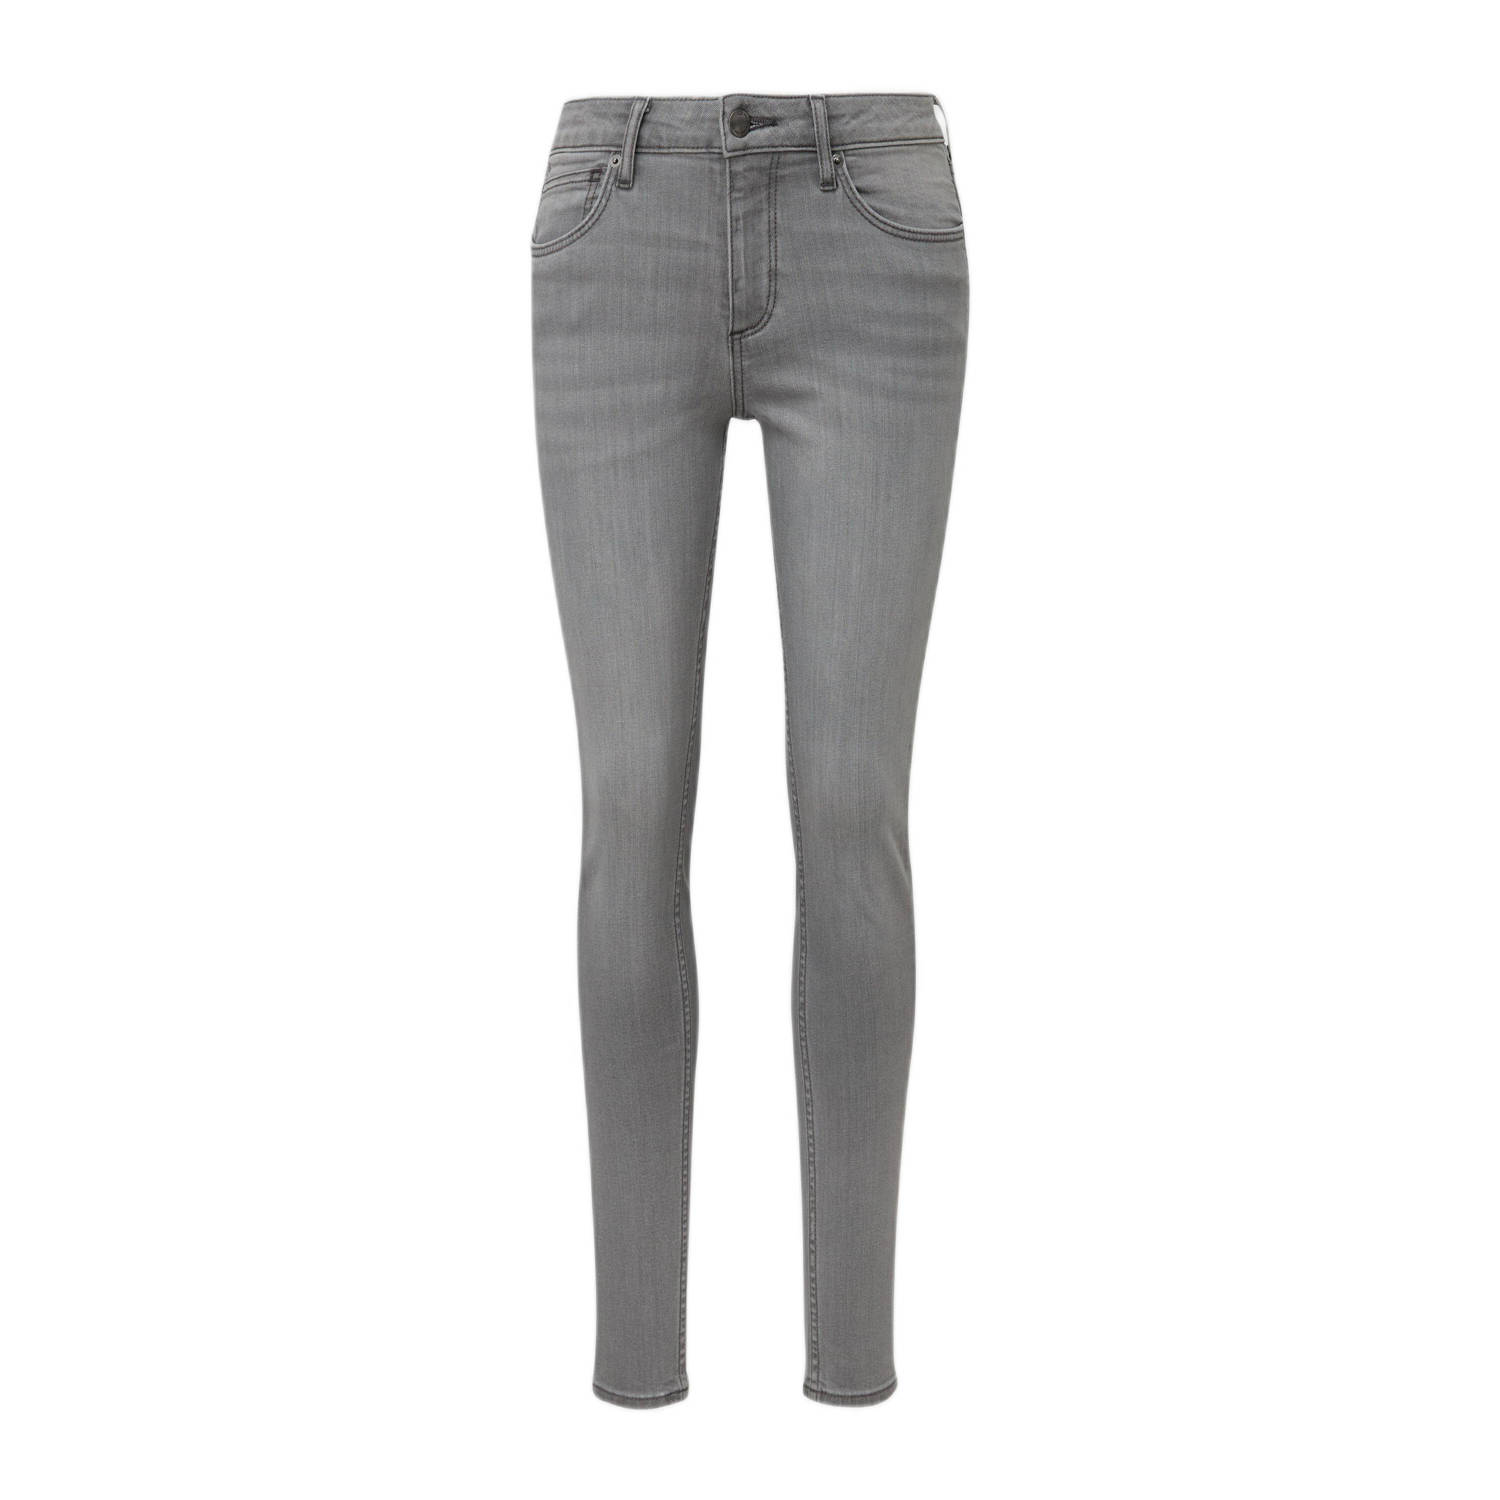 Q S by s.Oliver skinny jeans antraciet